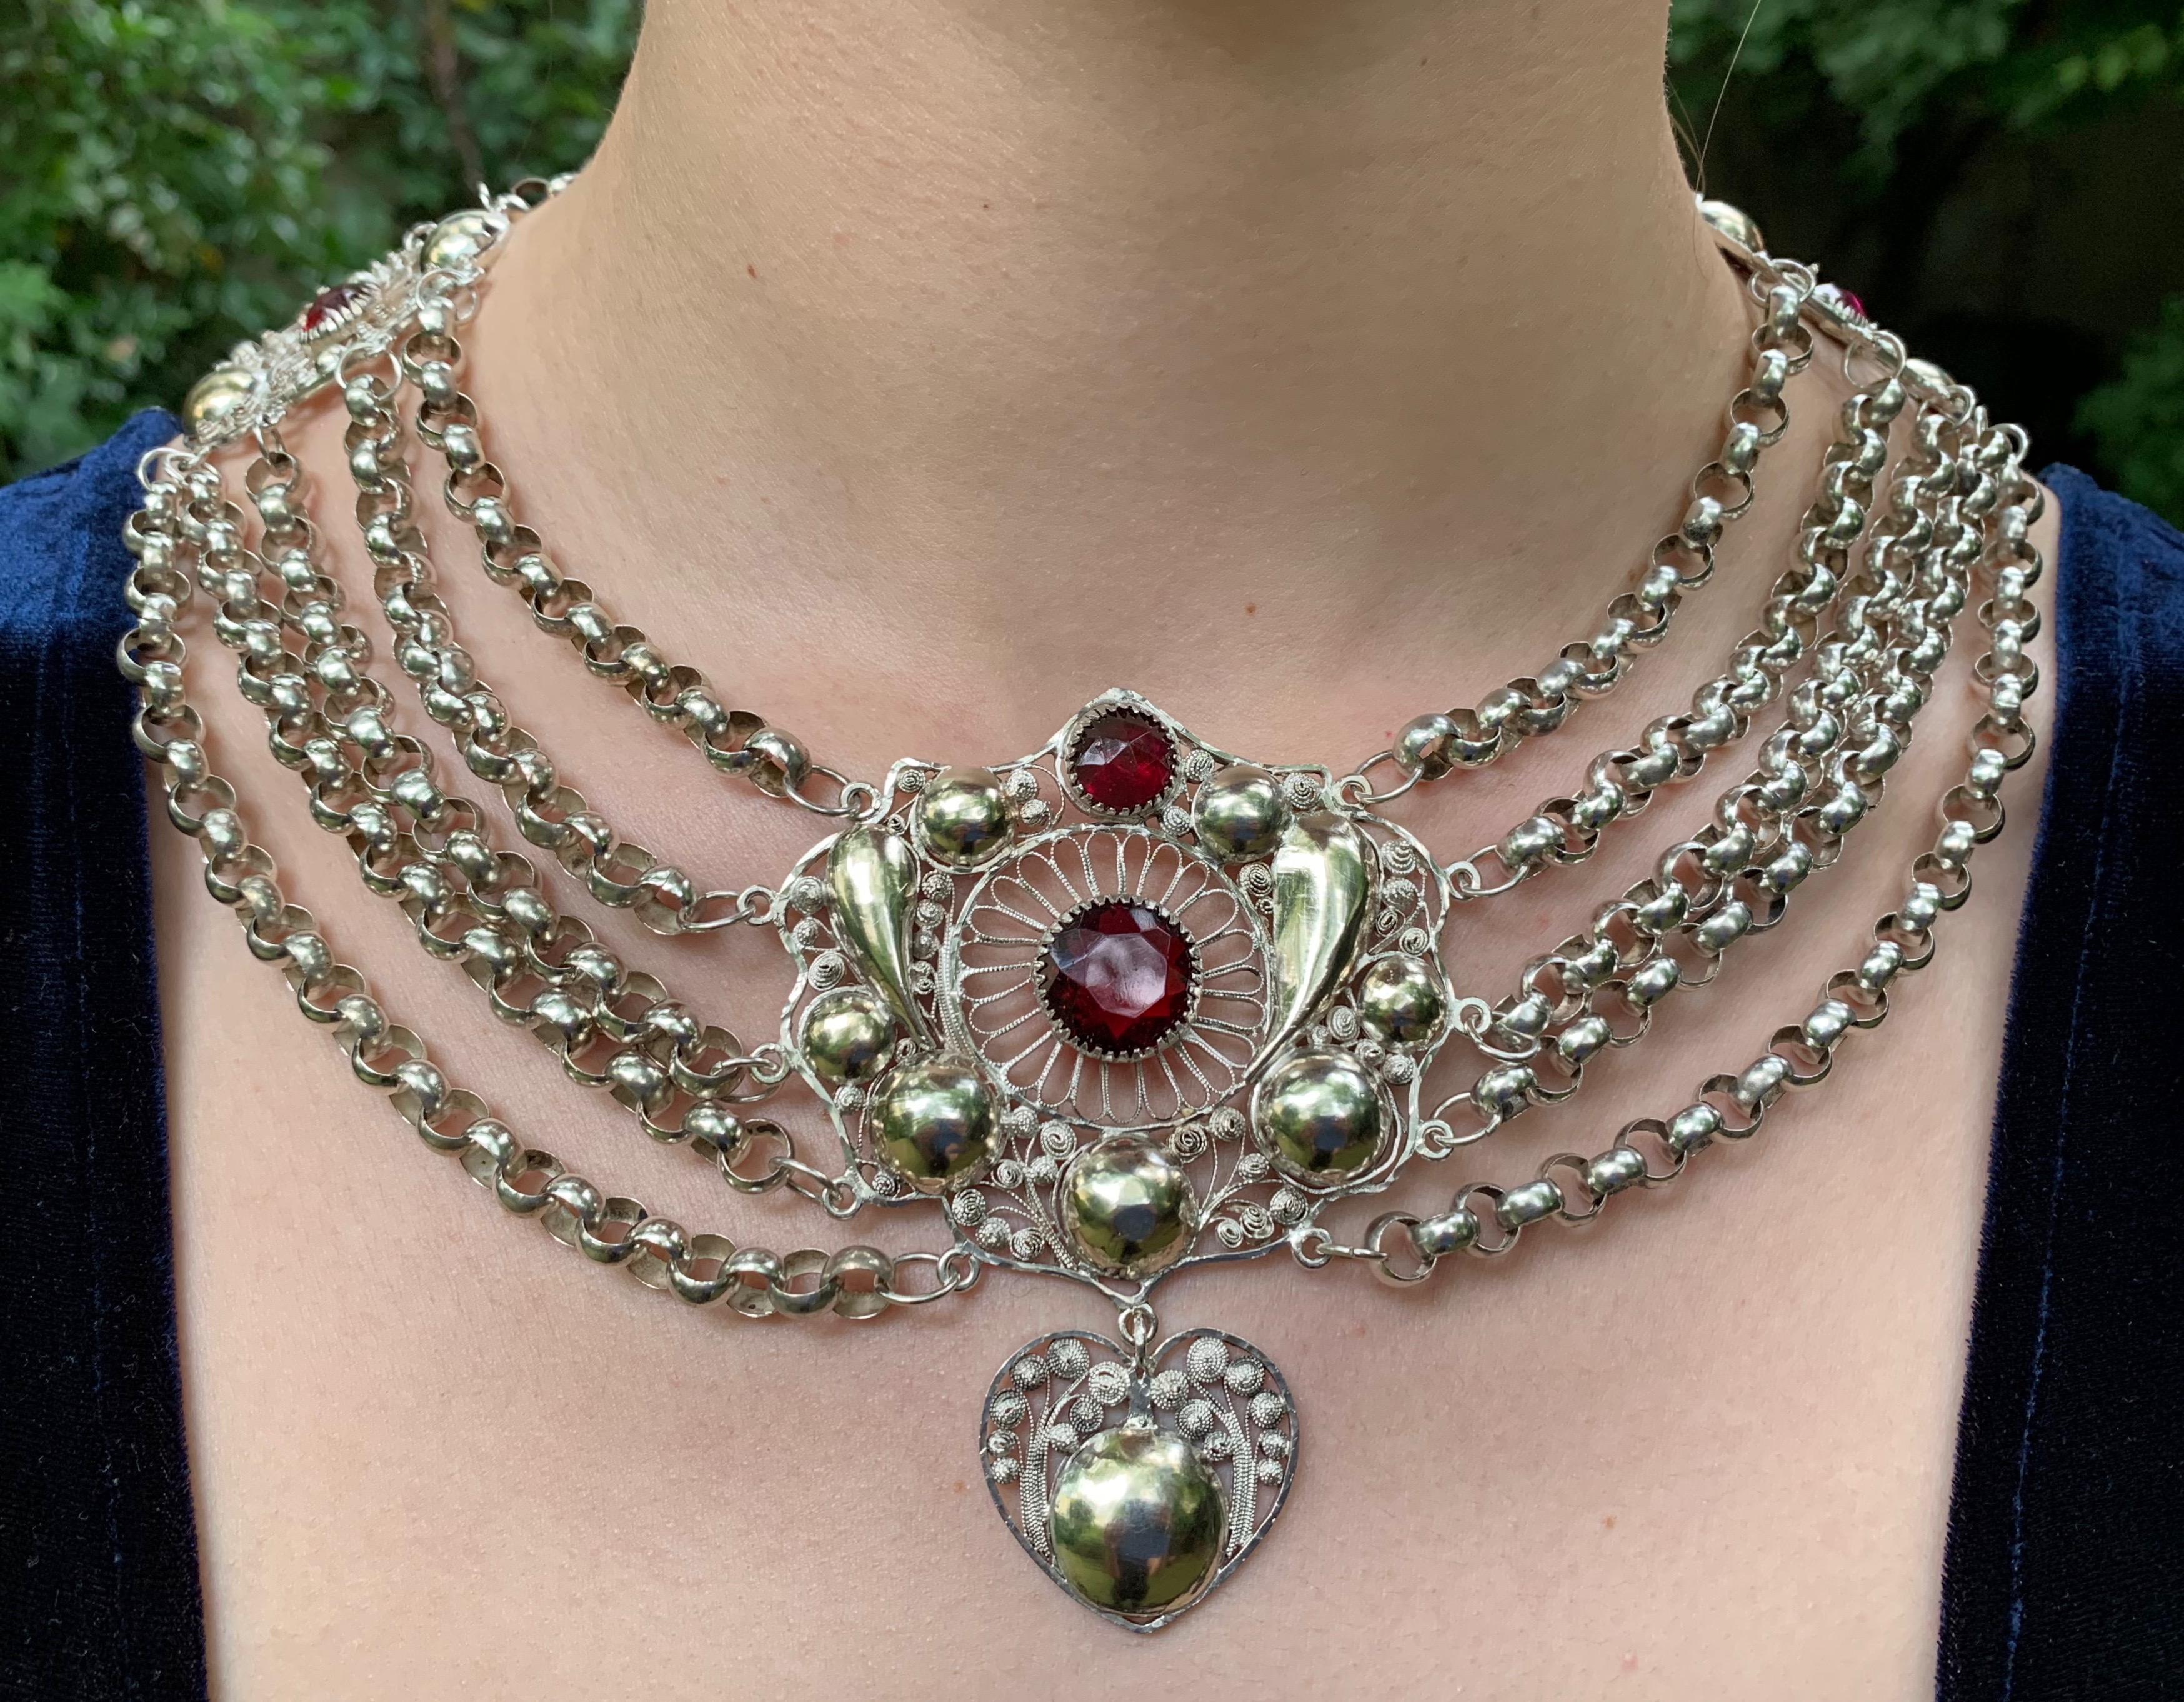 This outrageous silver necklace consists out of four rows of belcher chains and three ornamental plaques.  A center piece in the shape of a flower is decorated with embossed gilt ornaments and flowers made out of silver wire. They are grouped around